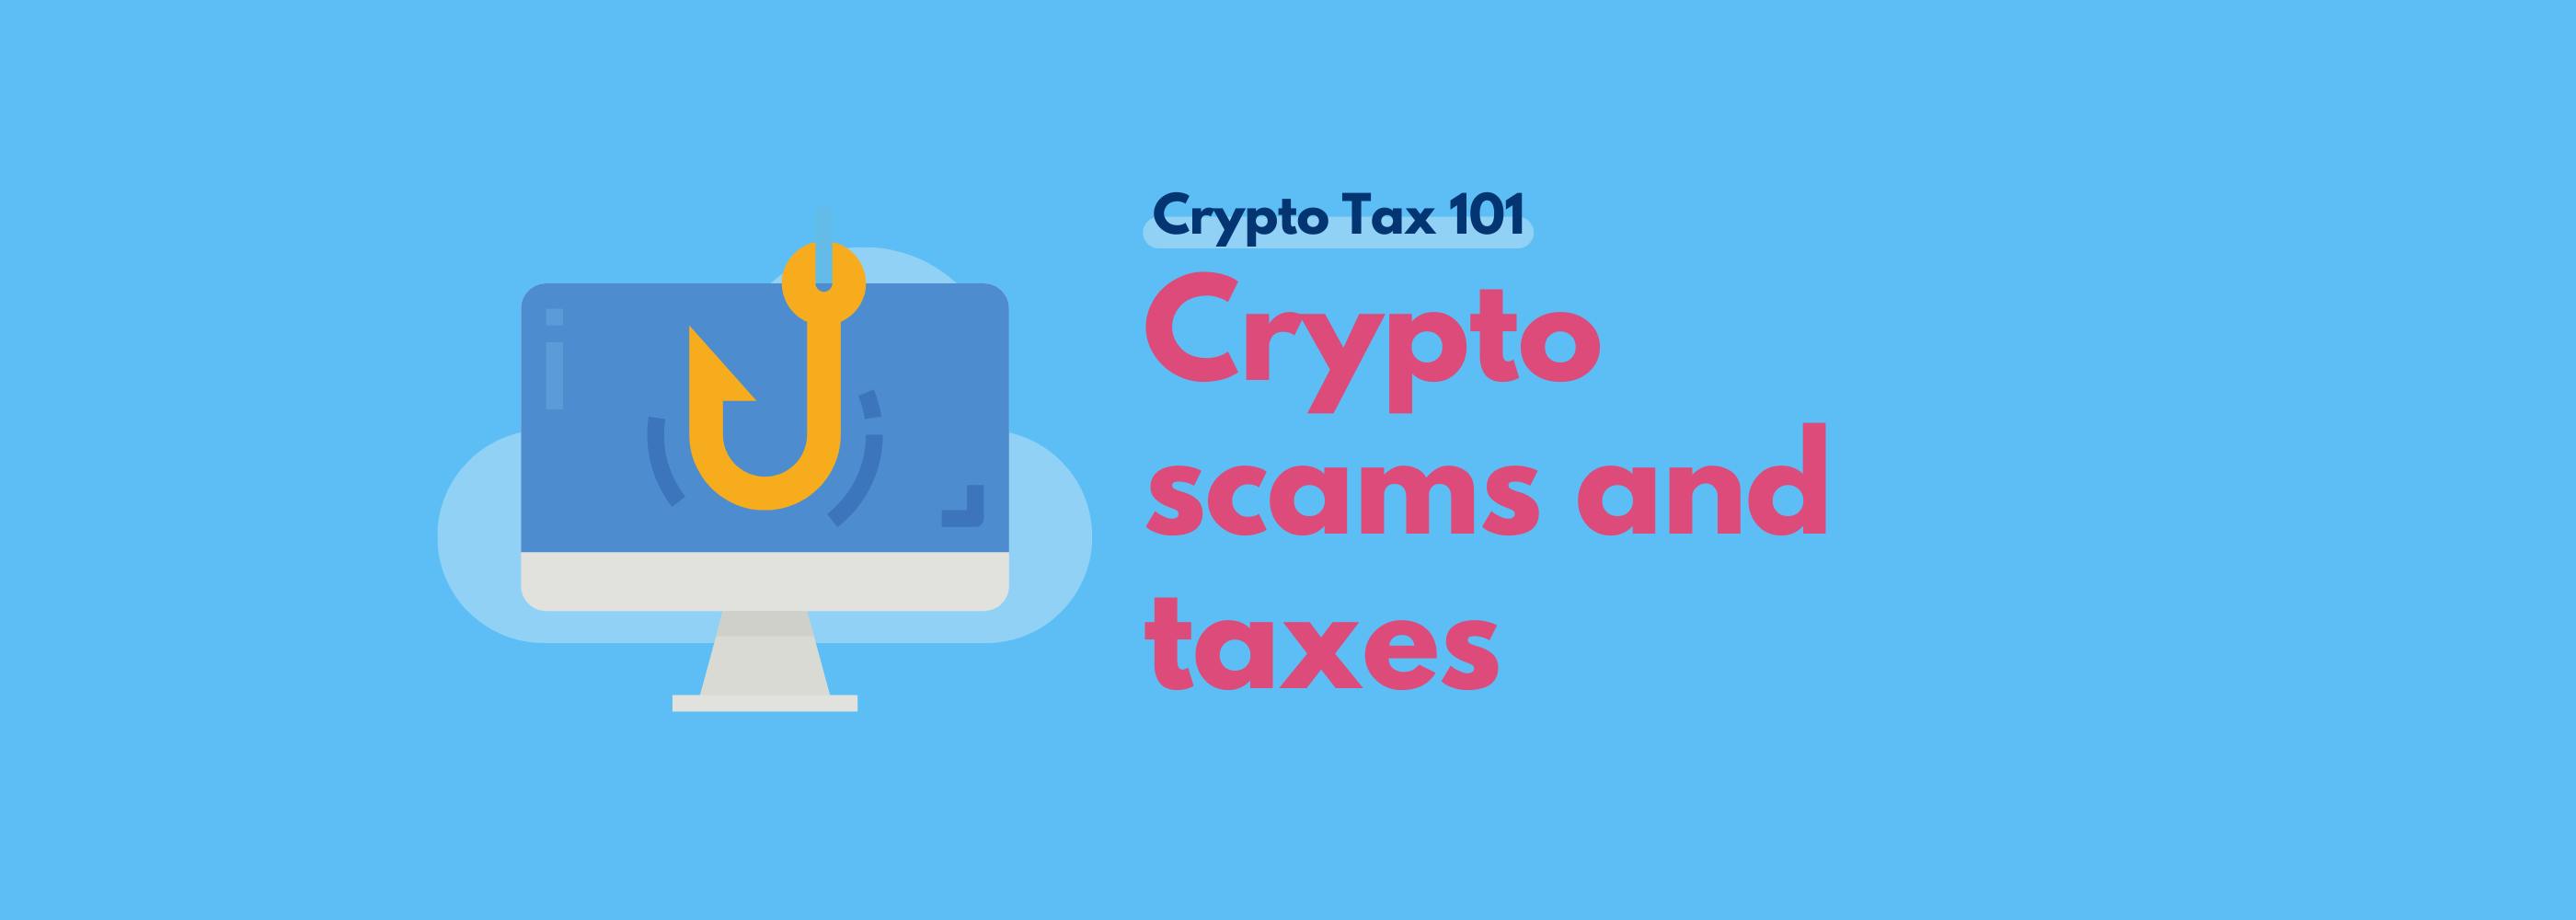 Crypto scams and taxes